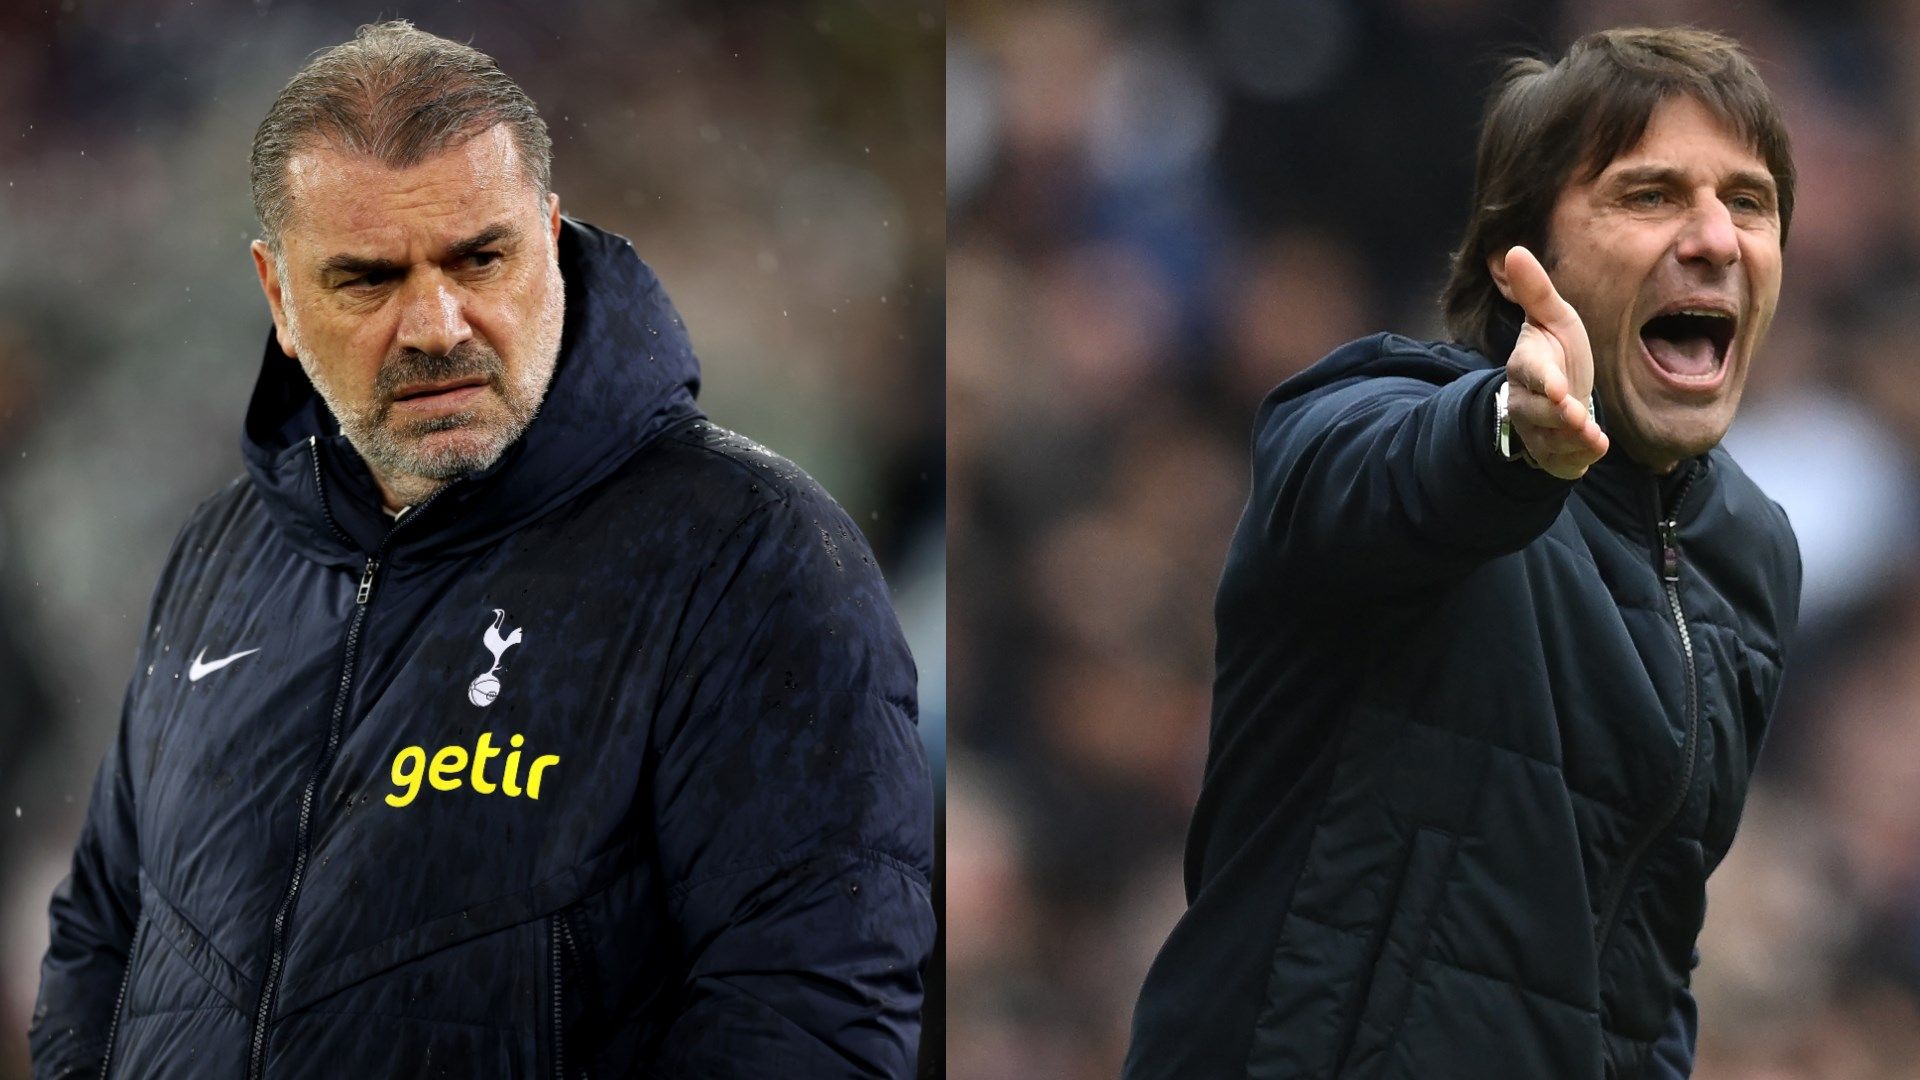 'Ange Postecoglou really doesn’t do any tactical work' - Eric Dier opens up on differences between current Tottenham boss and Antonio Conte